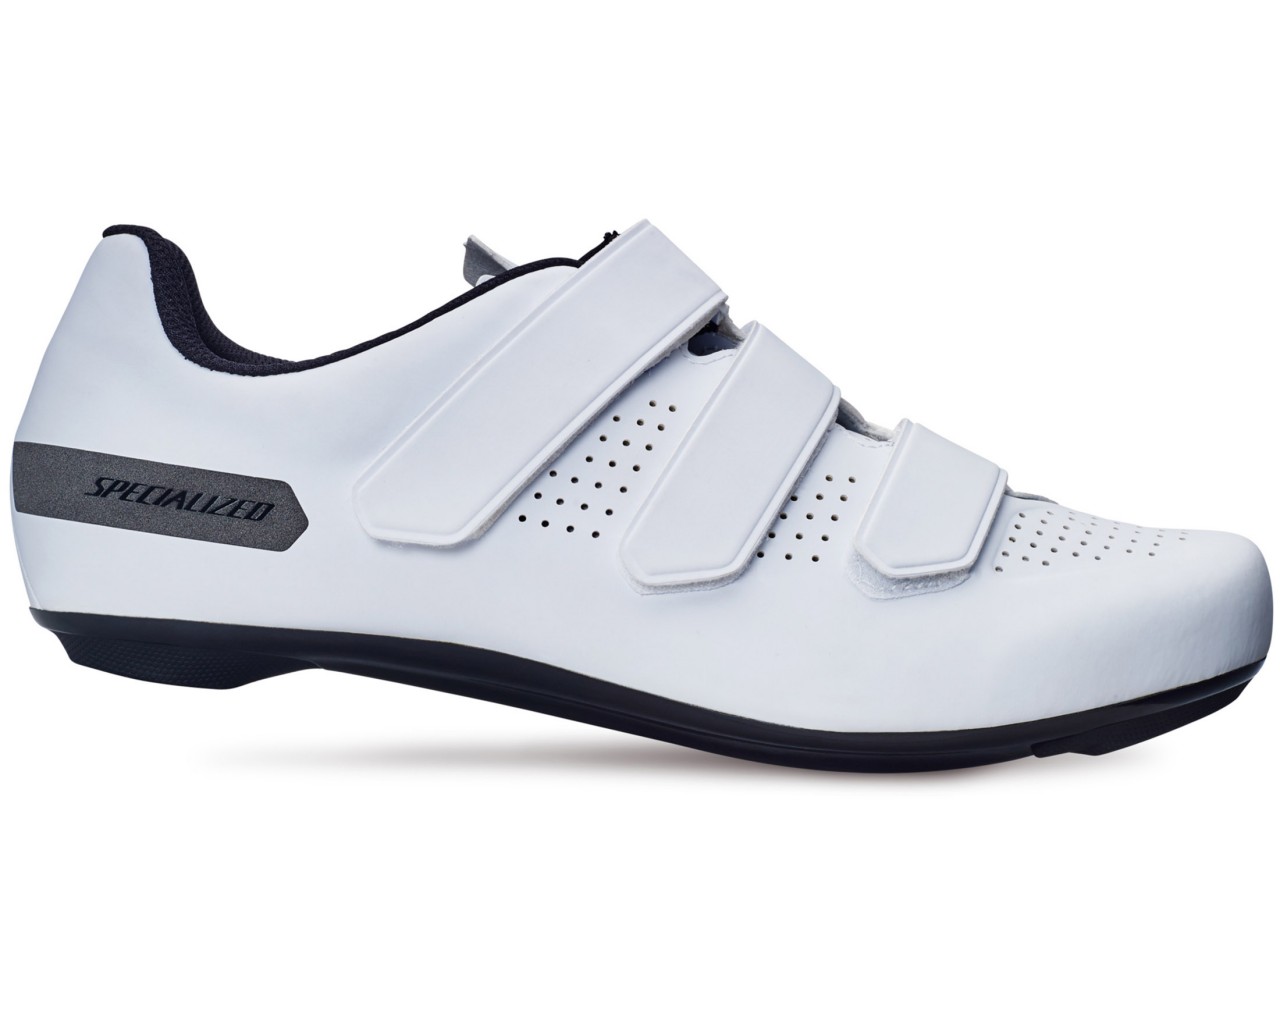 Specialized Torch 1.0 Road Bike Shoes | white